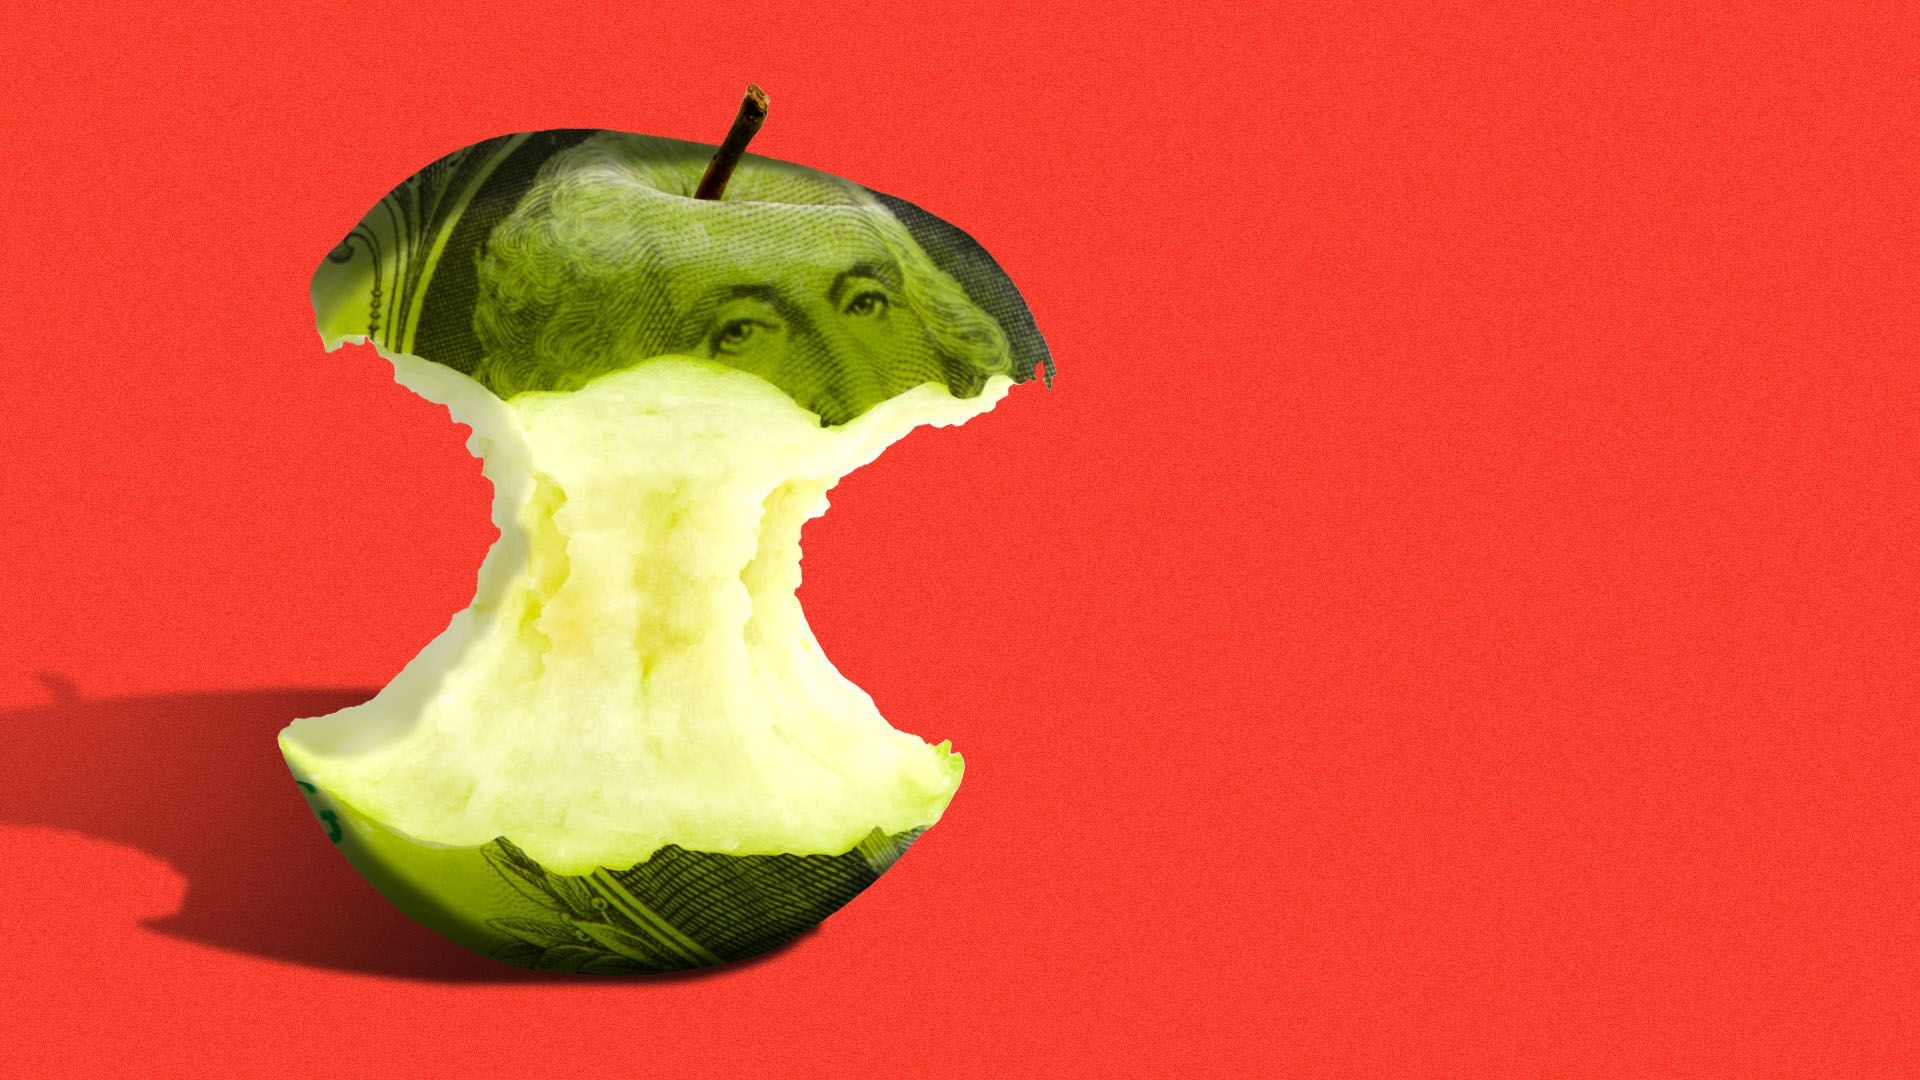 Illustration of an eaten apple with a skin made of a dollar bill